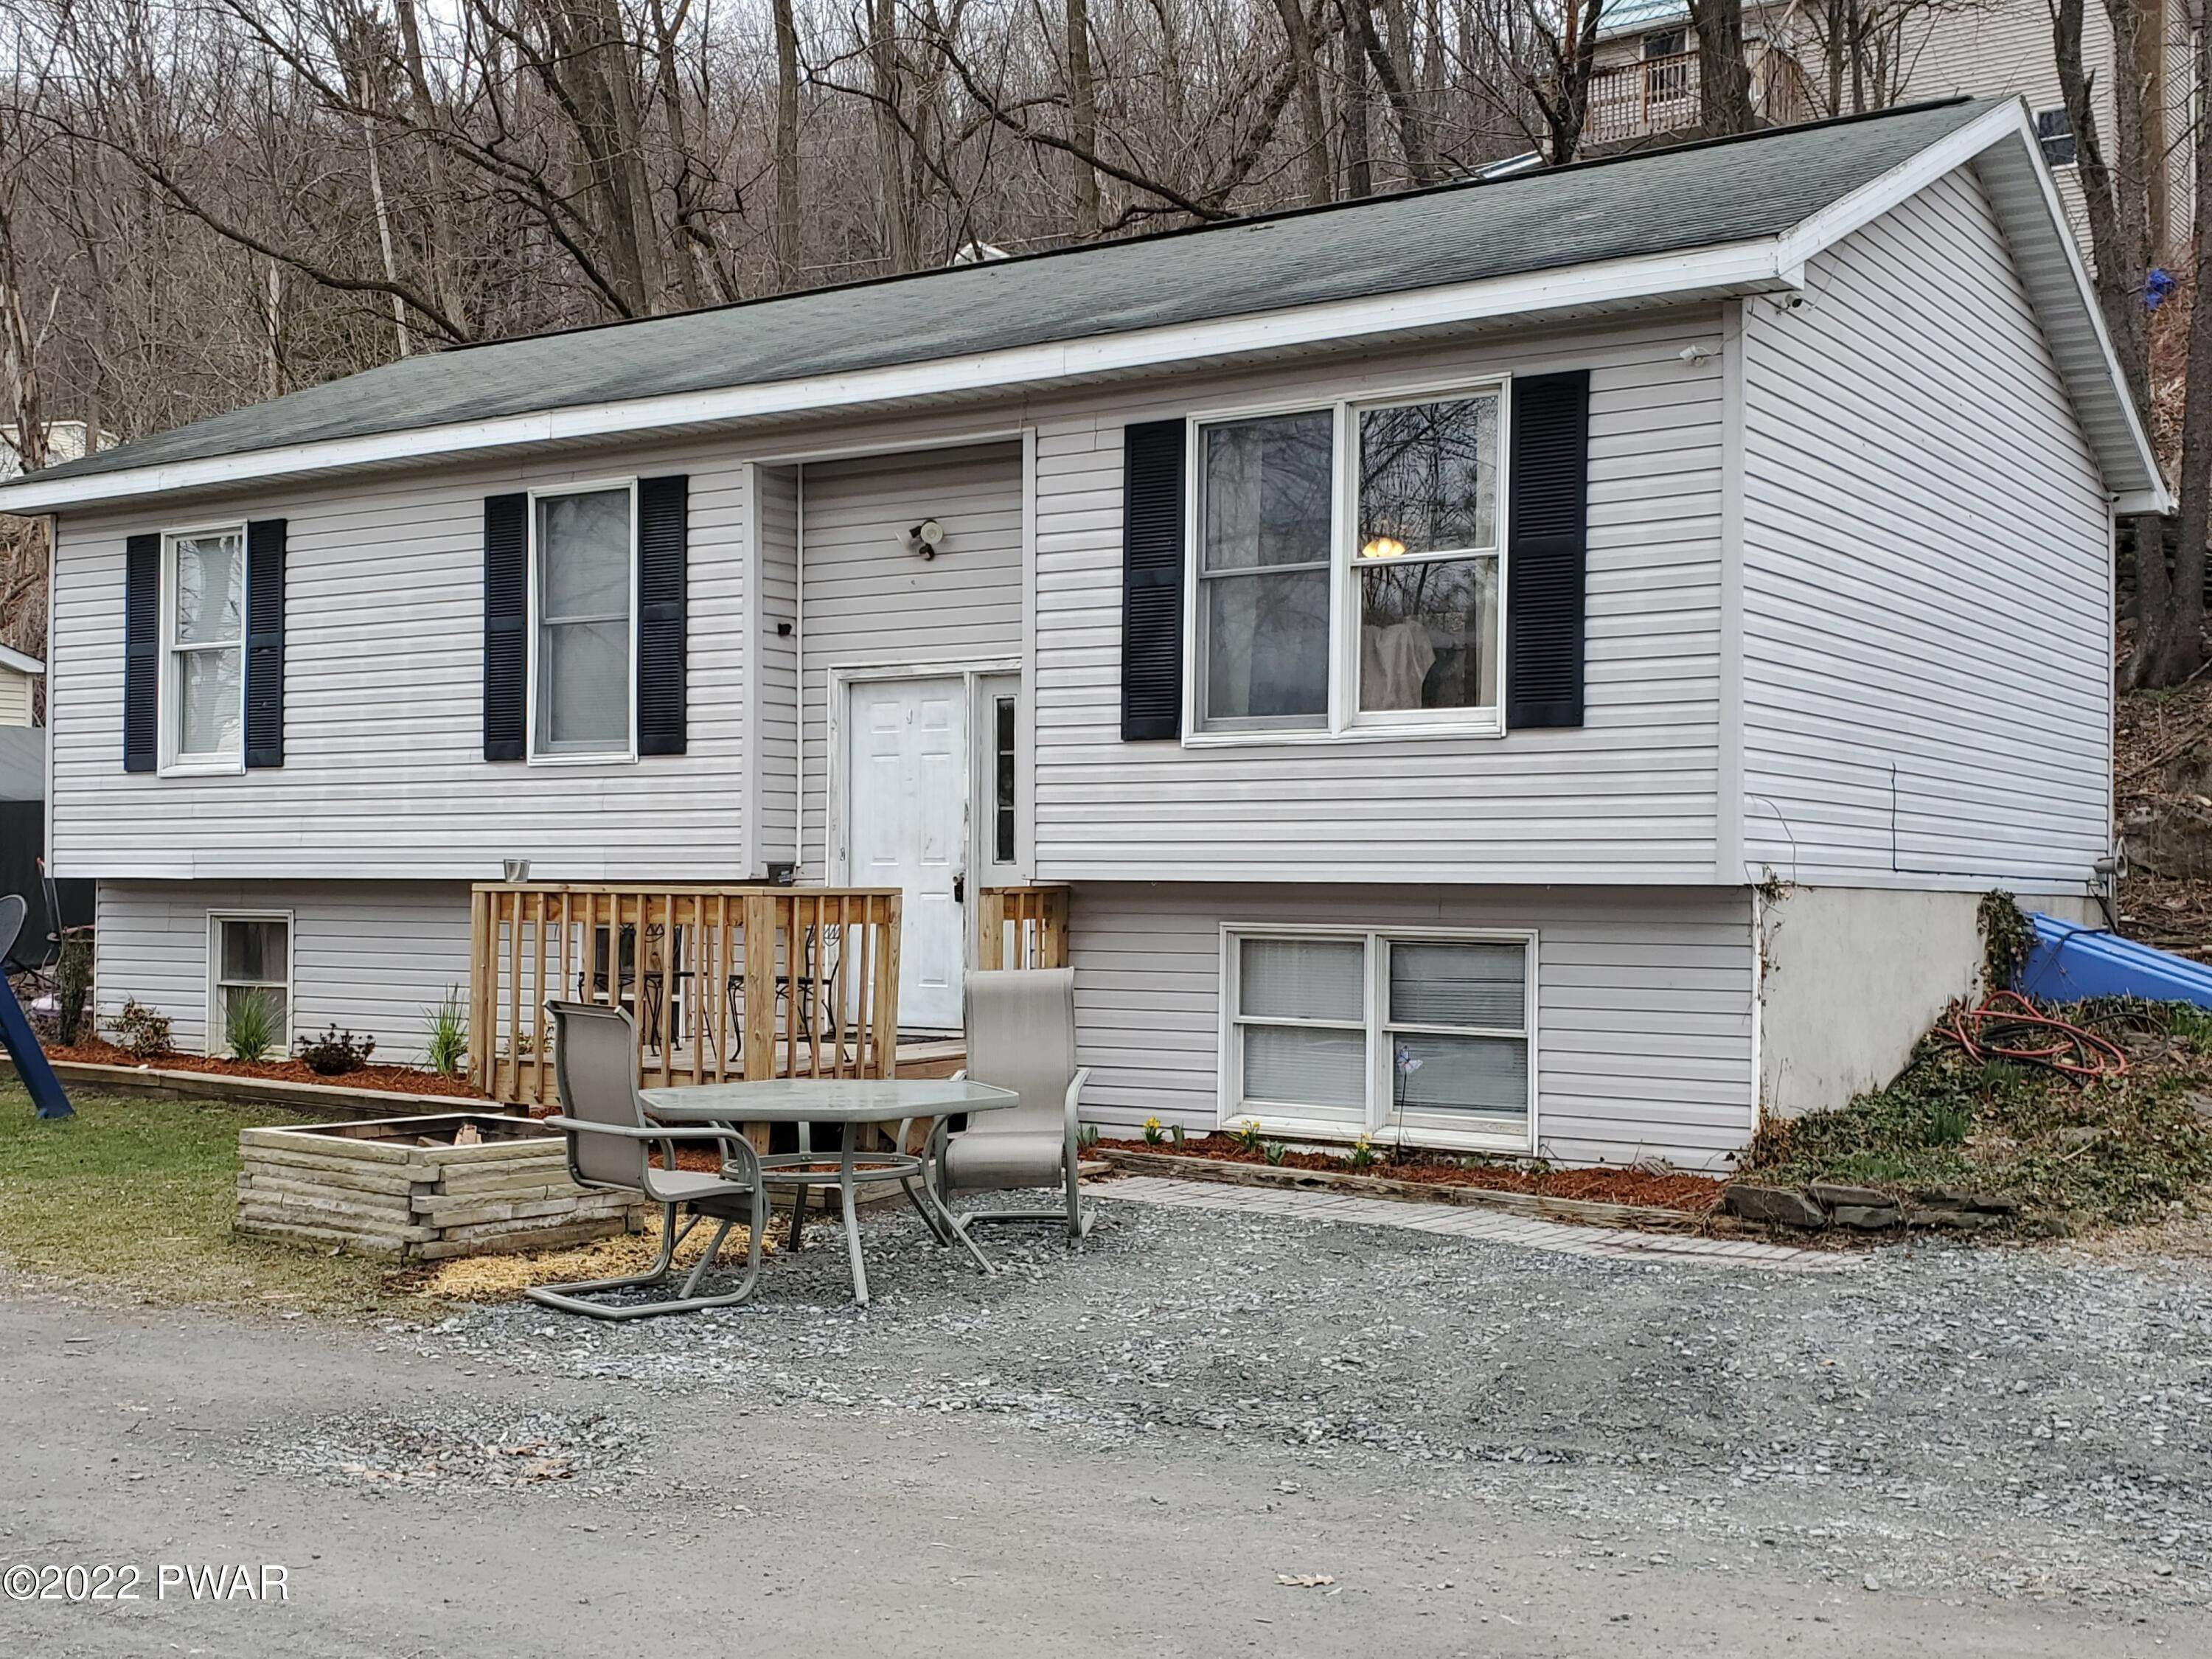 Property for Sale at 20 Settlers Aly Hawley, Pennsylvania 18428 United States